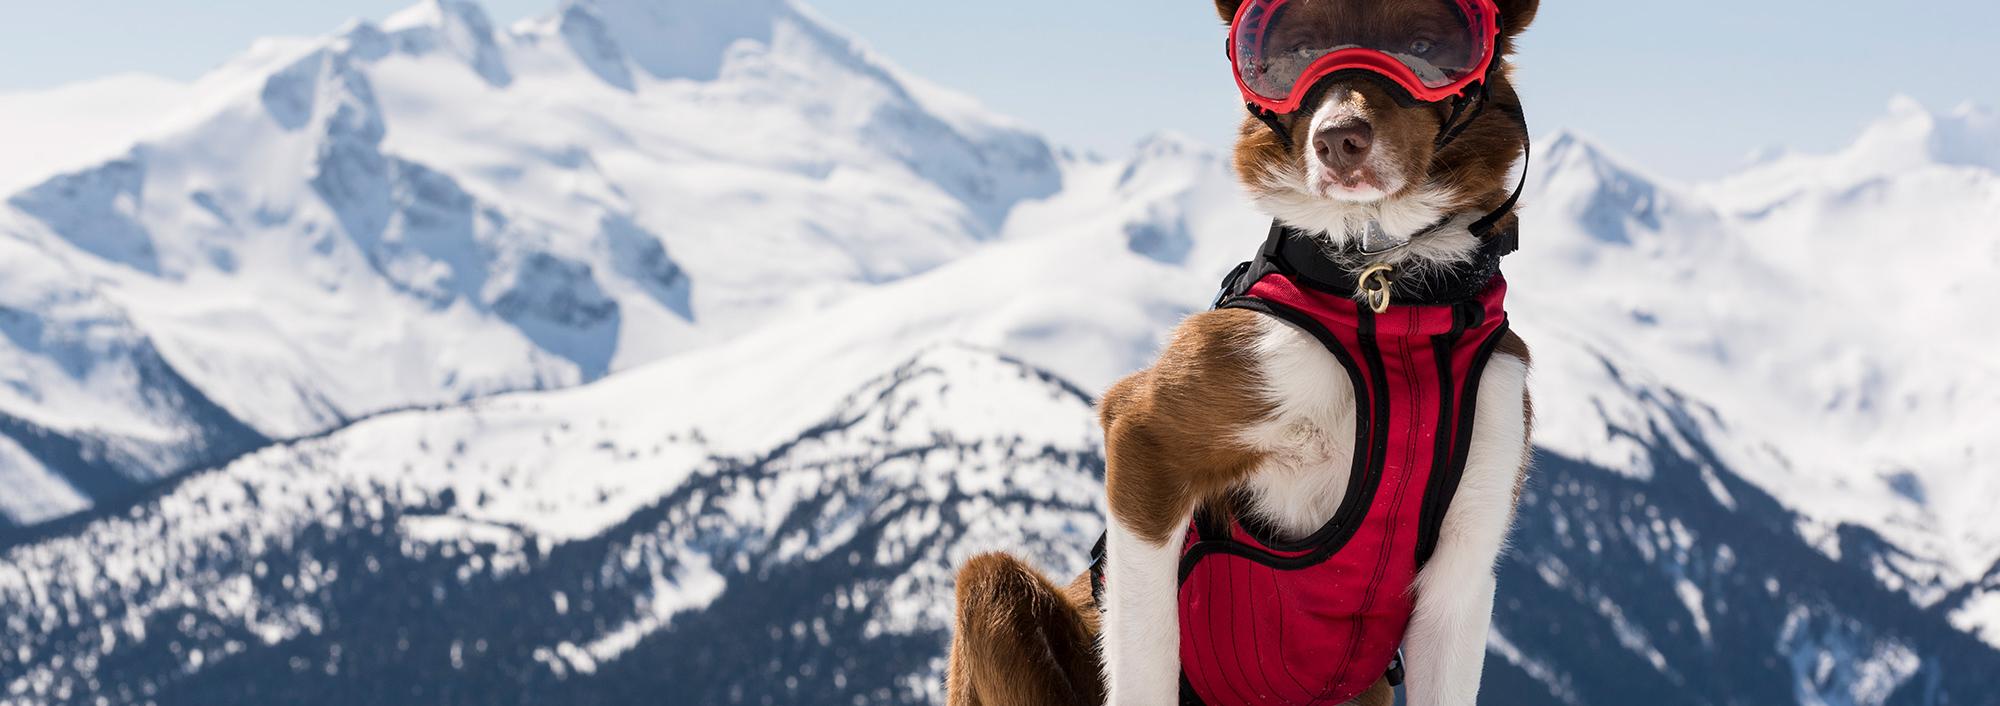 Dog wearing snow goggles sits on snowy cliff with mountain range behind him